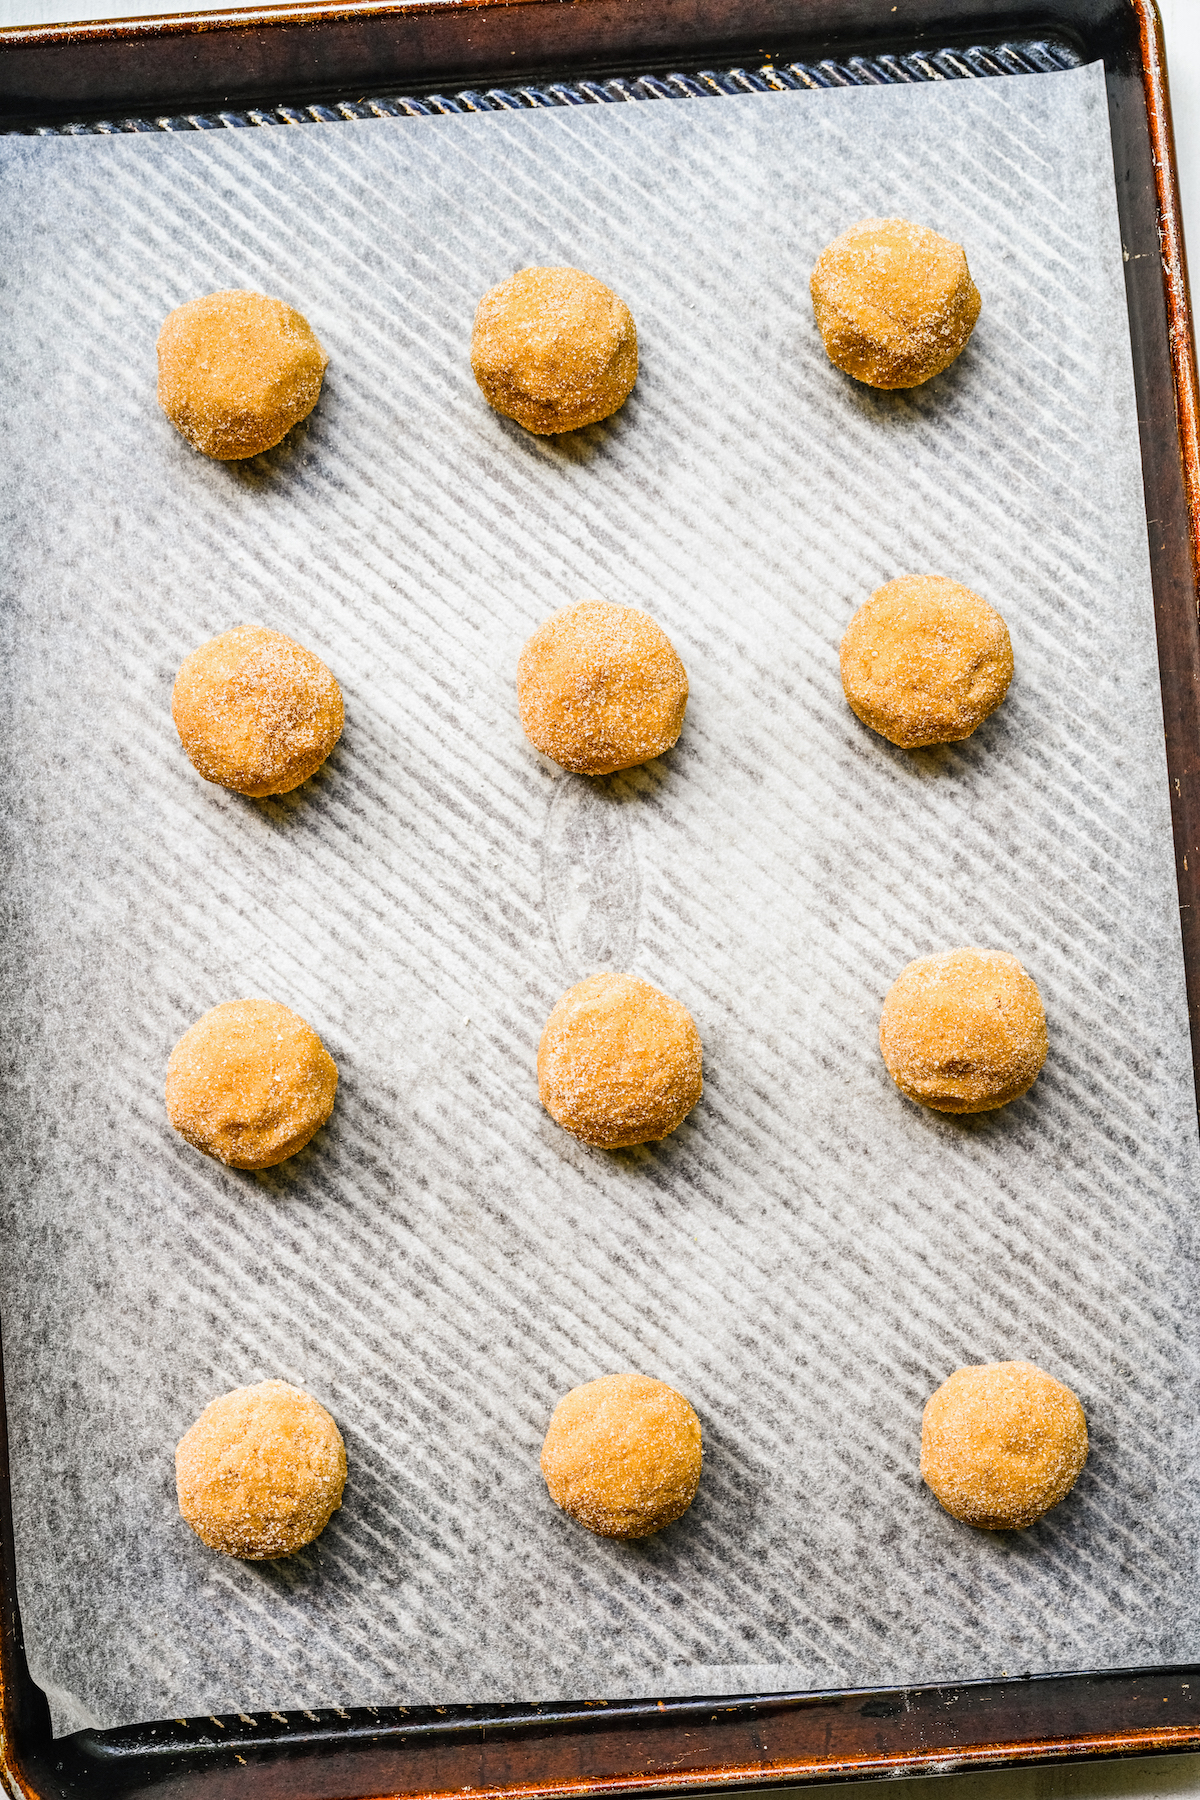 Cinnamon-sugar coated cookie dough balls, lined up on a baking sheet.